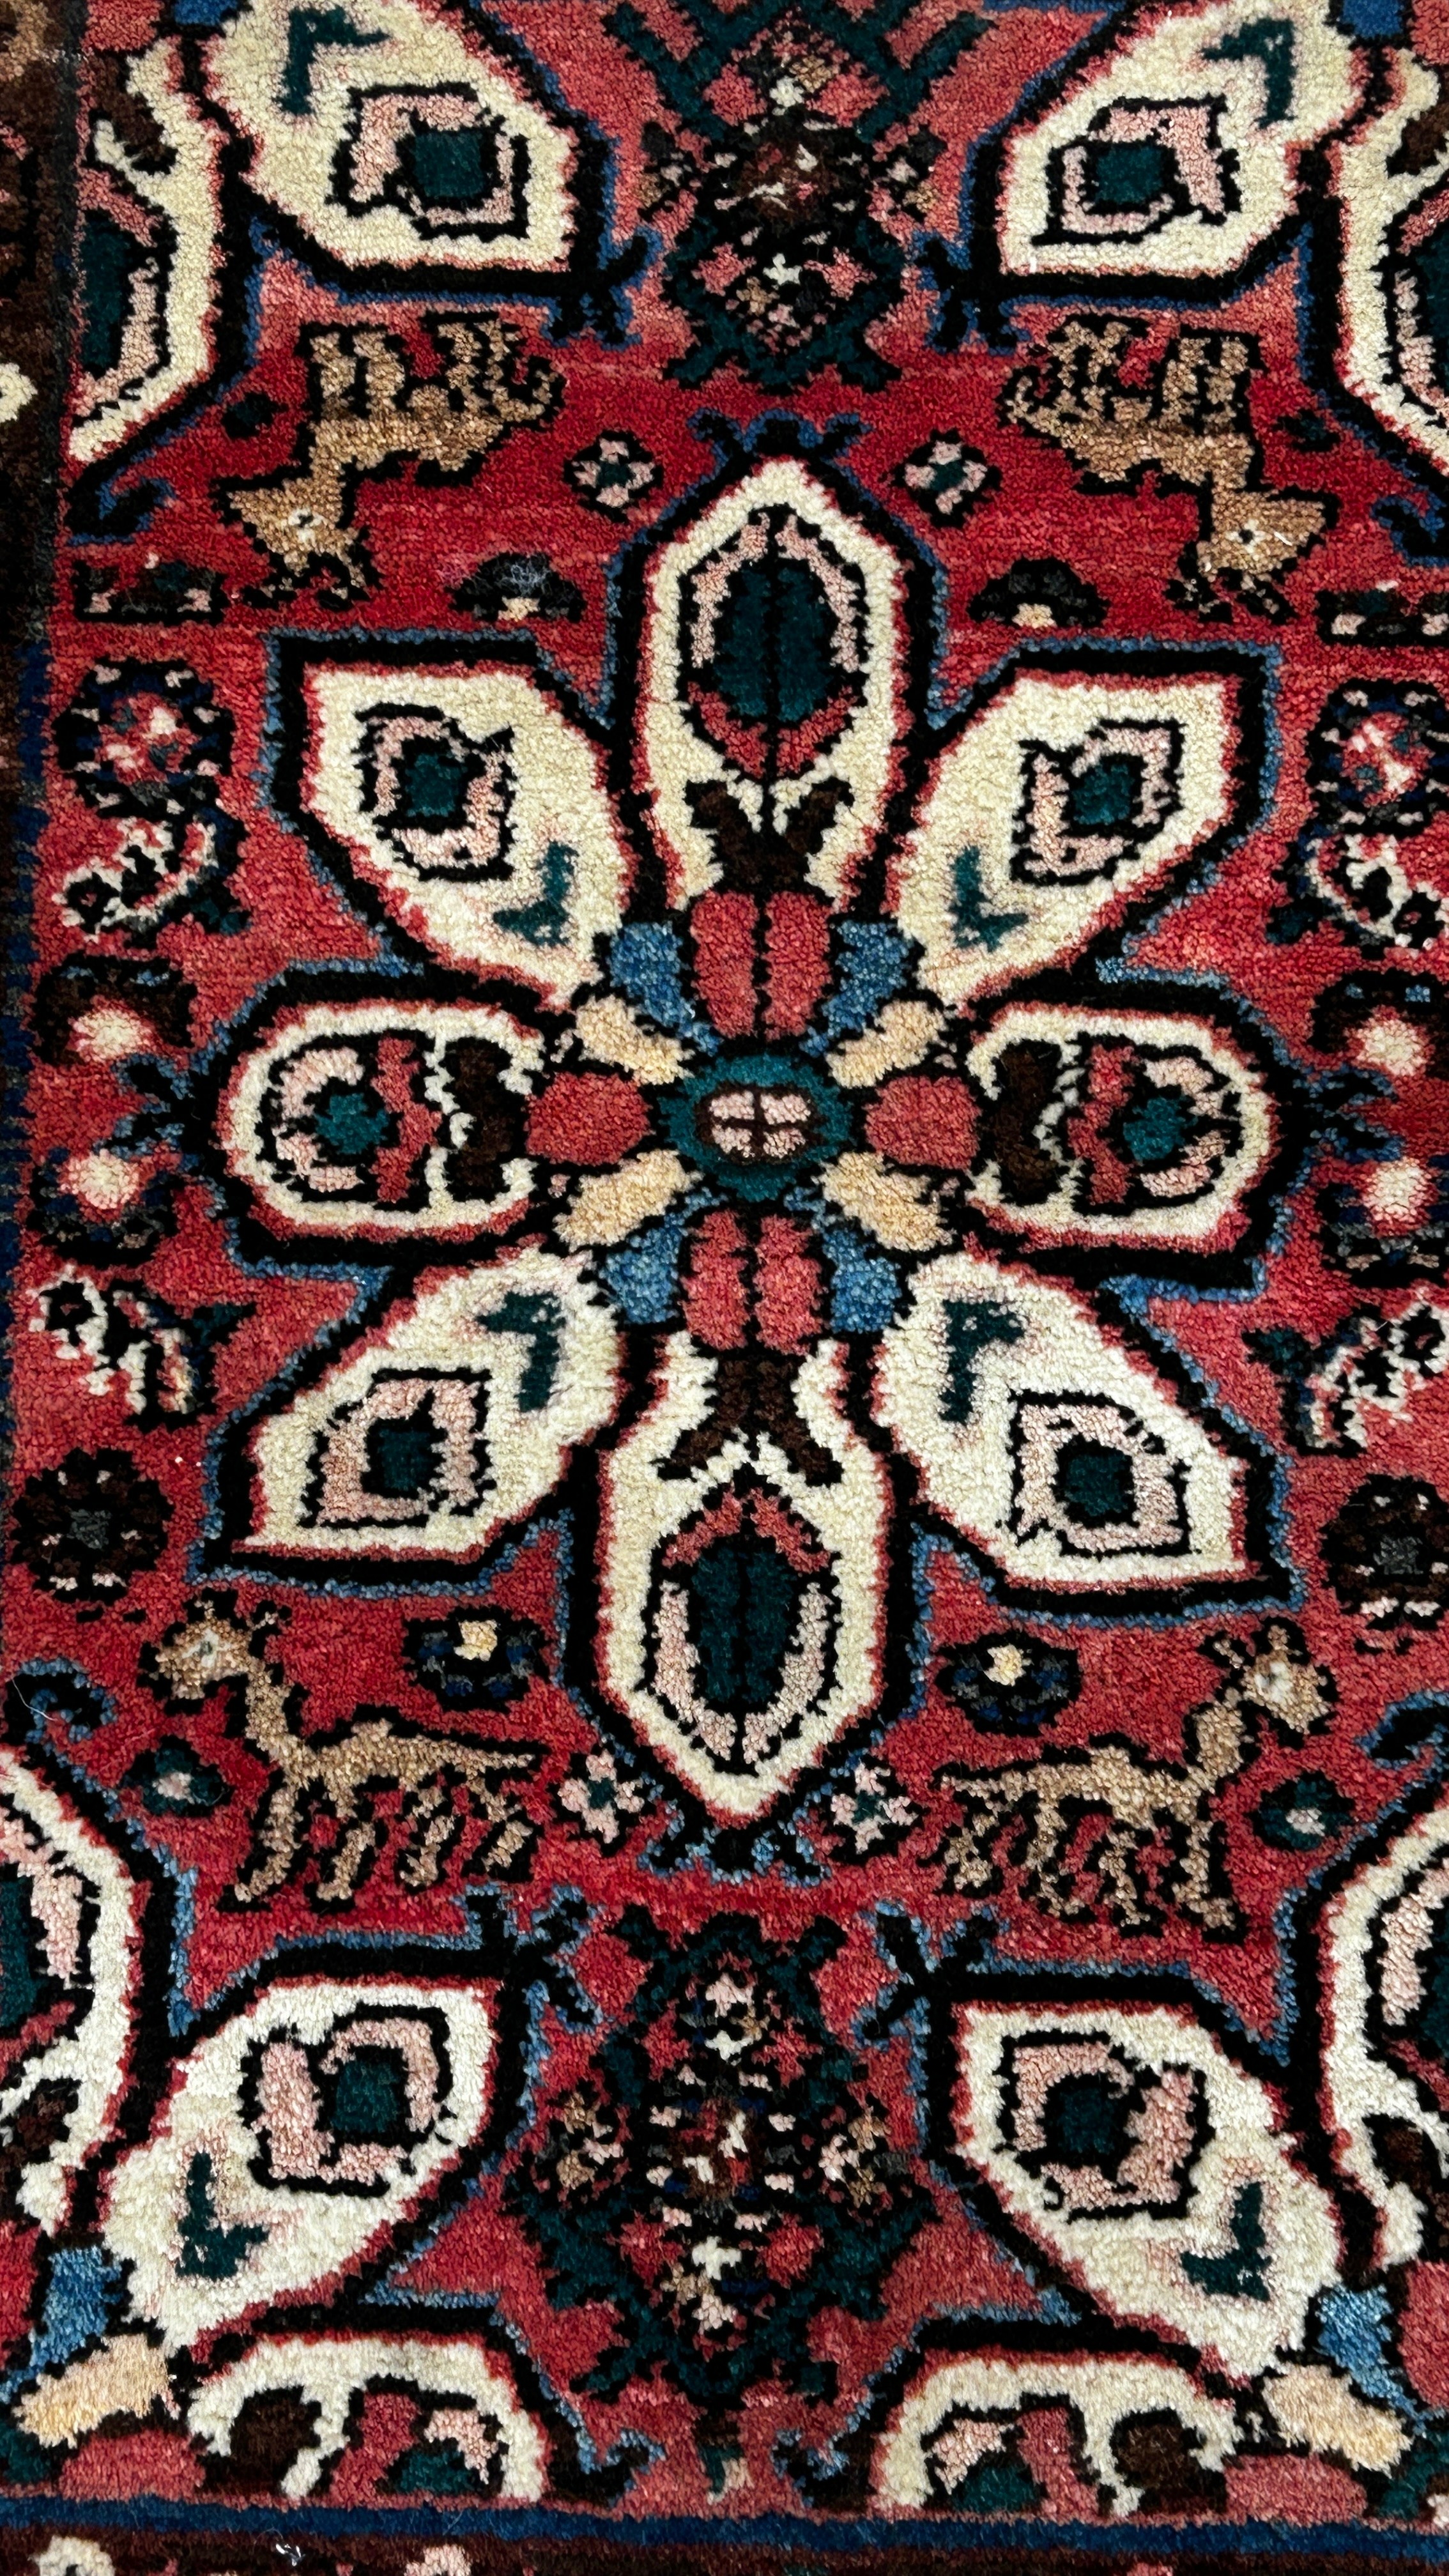 A small Iranian Hosseinabad rug with a central petal medallion 90cm x 63cm approximately - Image 3 of 3